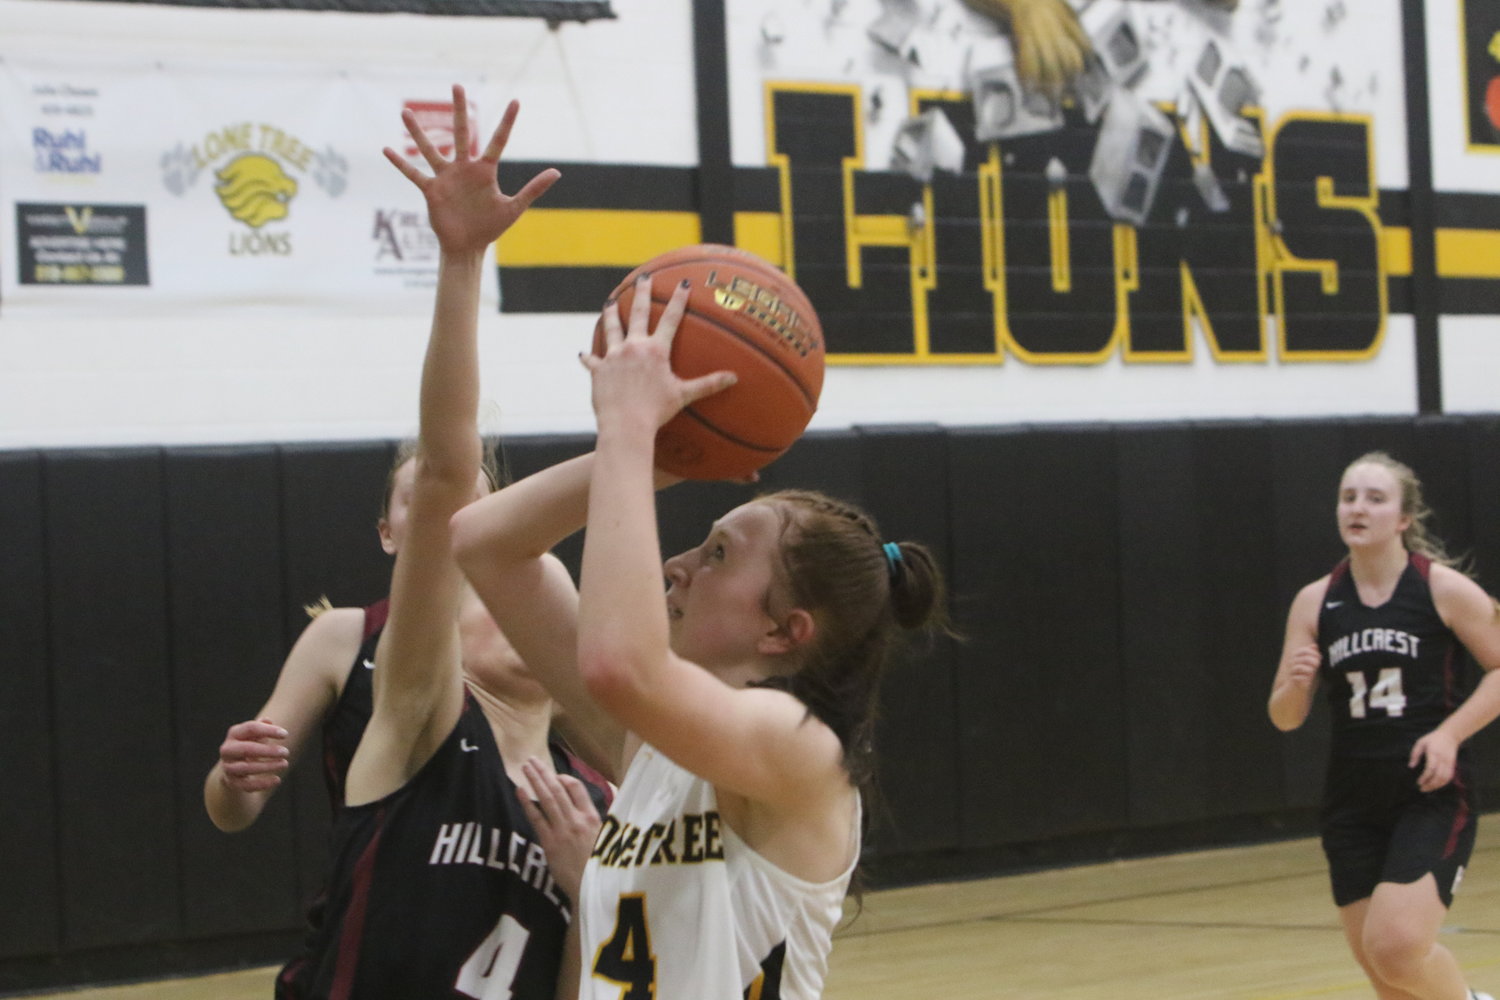 Riley Krueger of Lone Tree goes up for a shot against Hillcrest's Norah Yoder.